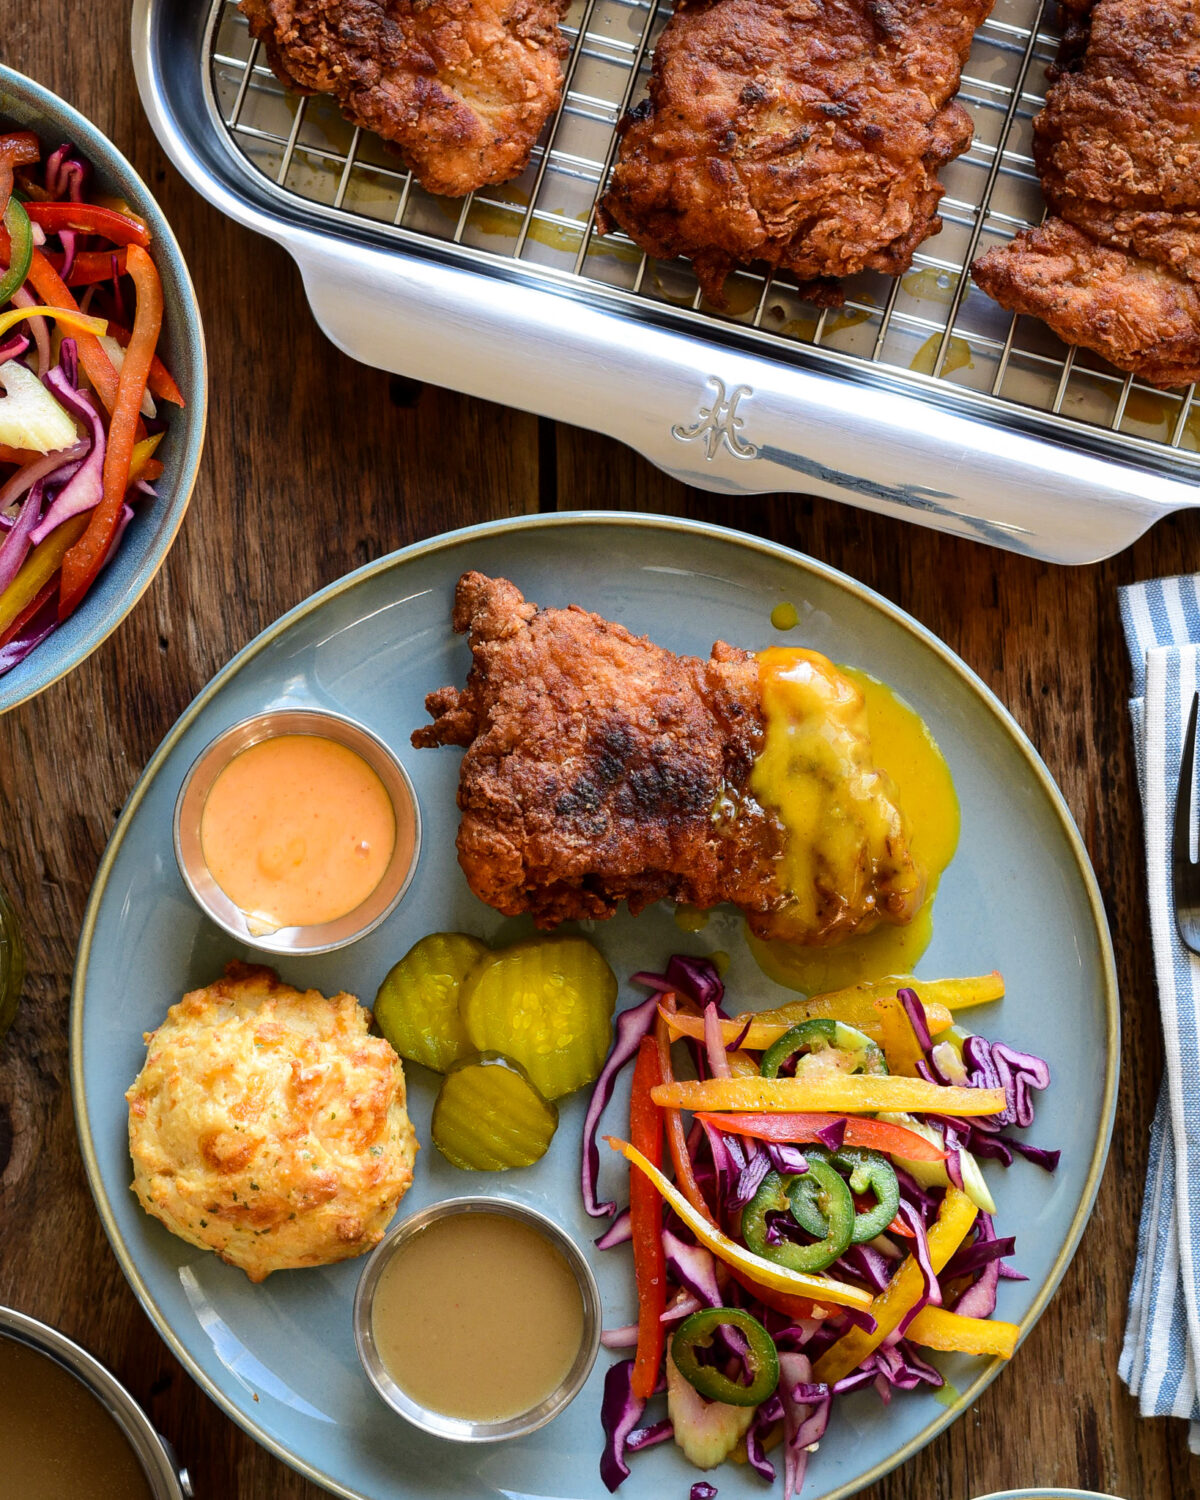 A plate with a piece of spicy buttermilk fried chicken served with a psychedelic slaw, cheddar biscuits and three dips.